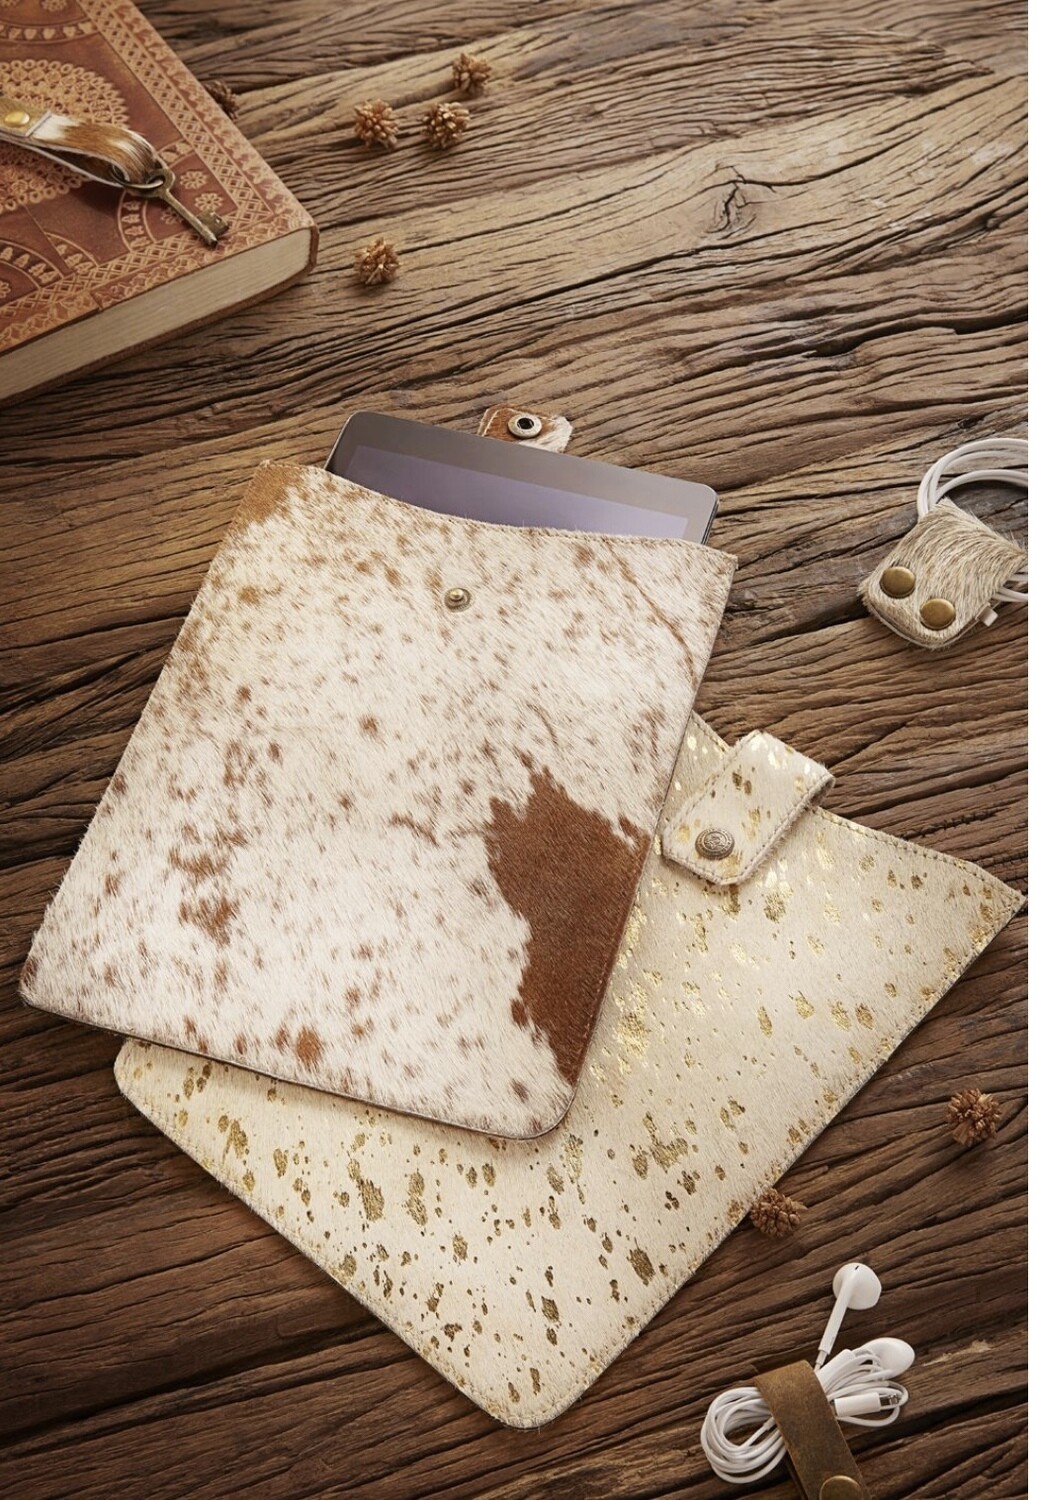 Western Leather iPad Cover